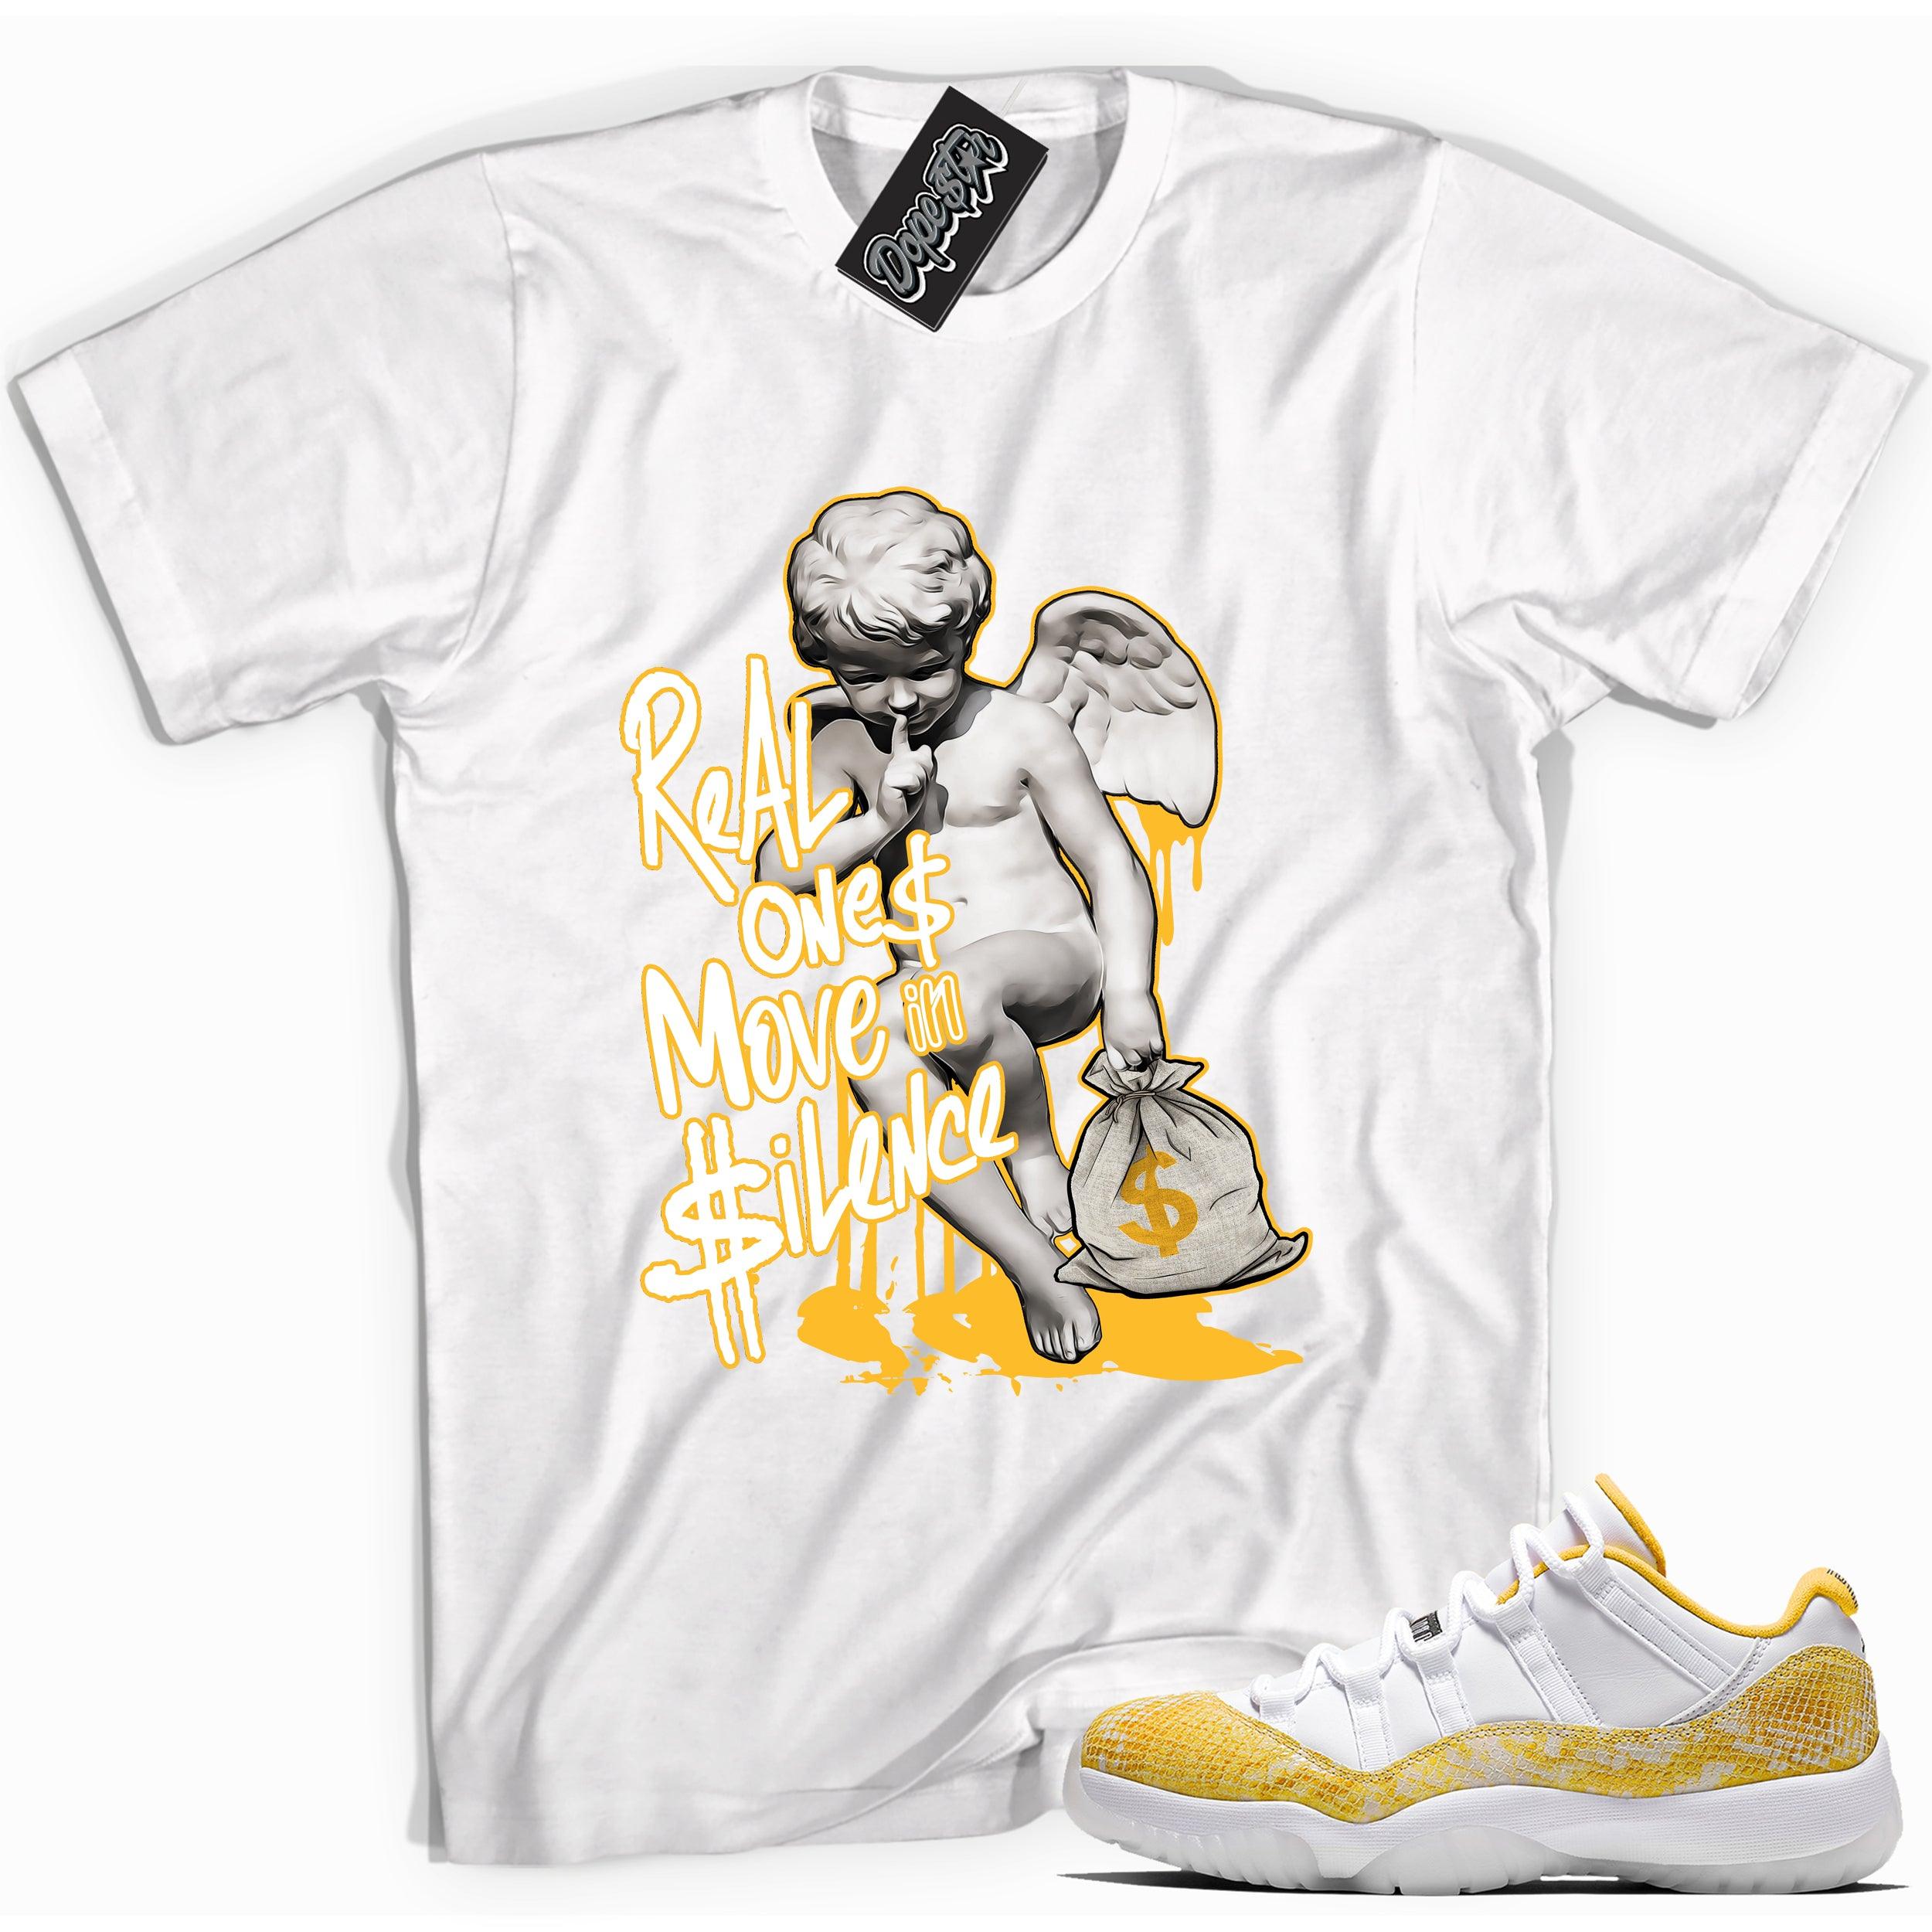 Cool white graphic tee with 'real ones move in silence' print, that perfectly matches Air Jordan 11 Retro Low Yellow Snakeskin sneakers